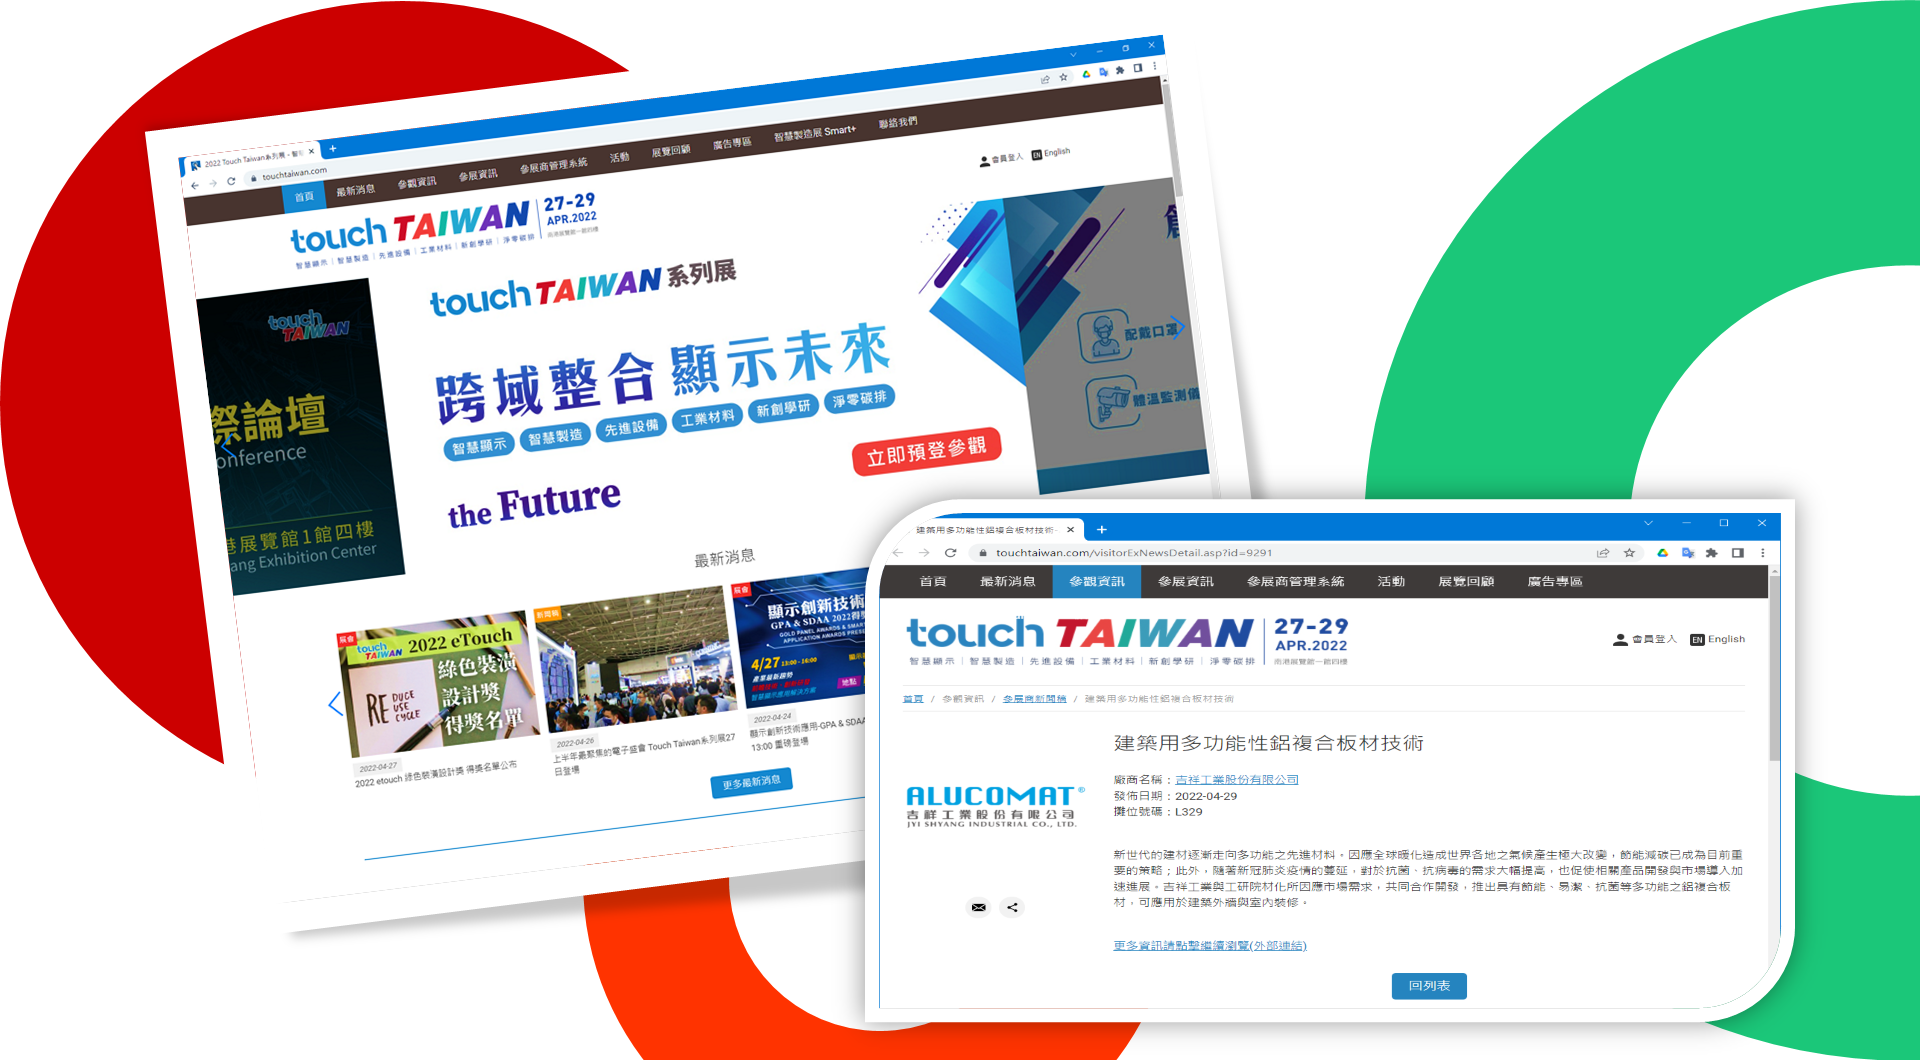 ALUCOMAT at Touch Taiwan 2022